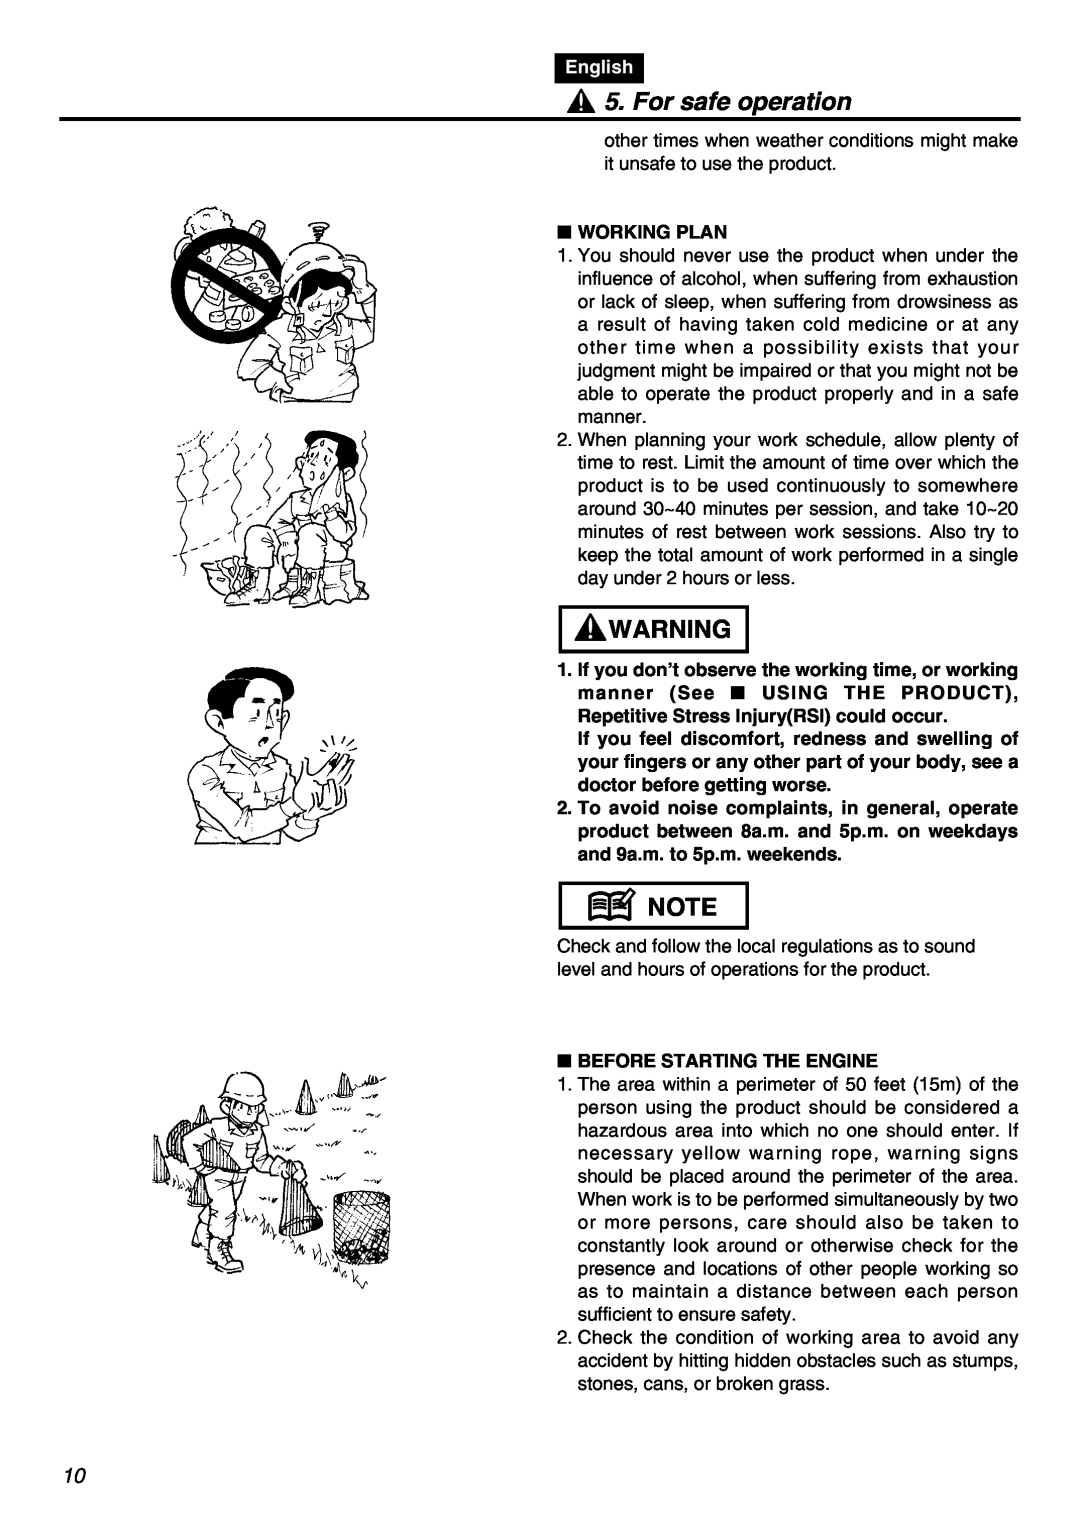 Zenoah TR2301S manual For safe operation, English, Working Plan, Repetitive Stress InjuryRSI could occur 